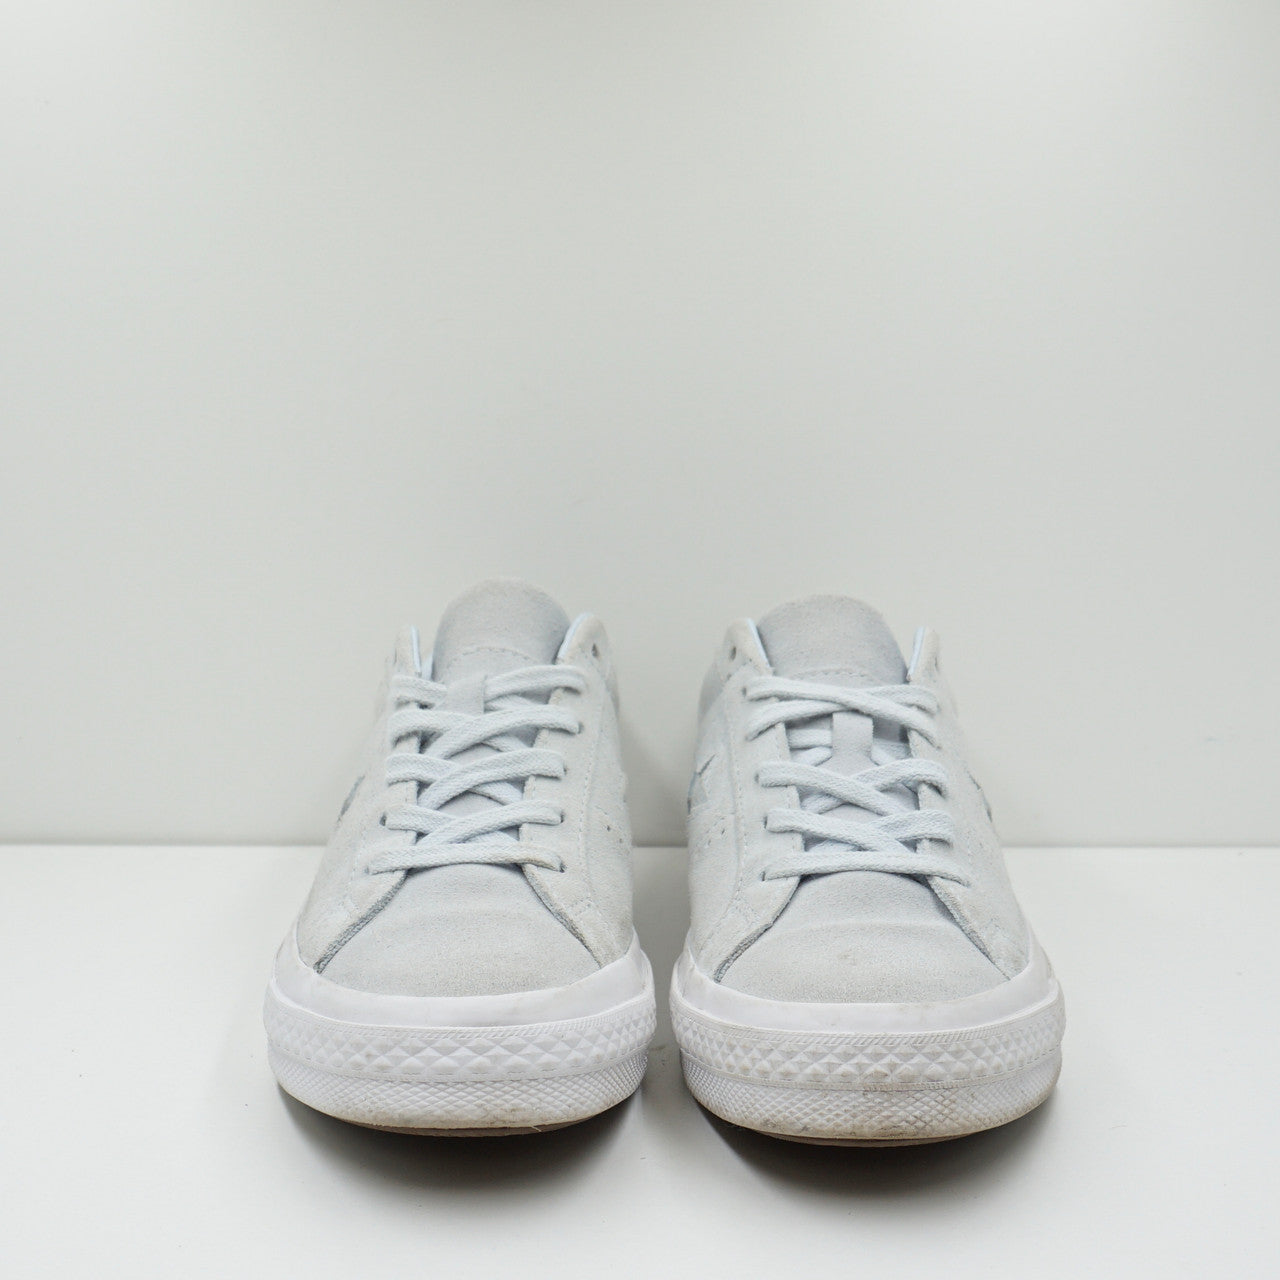 Converse One Star OX Suede